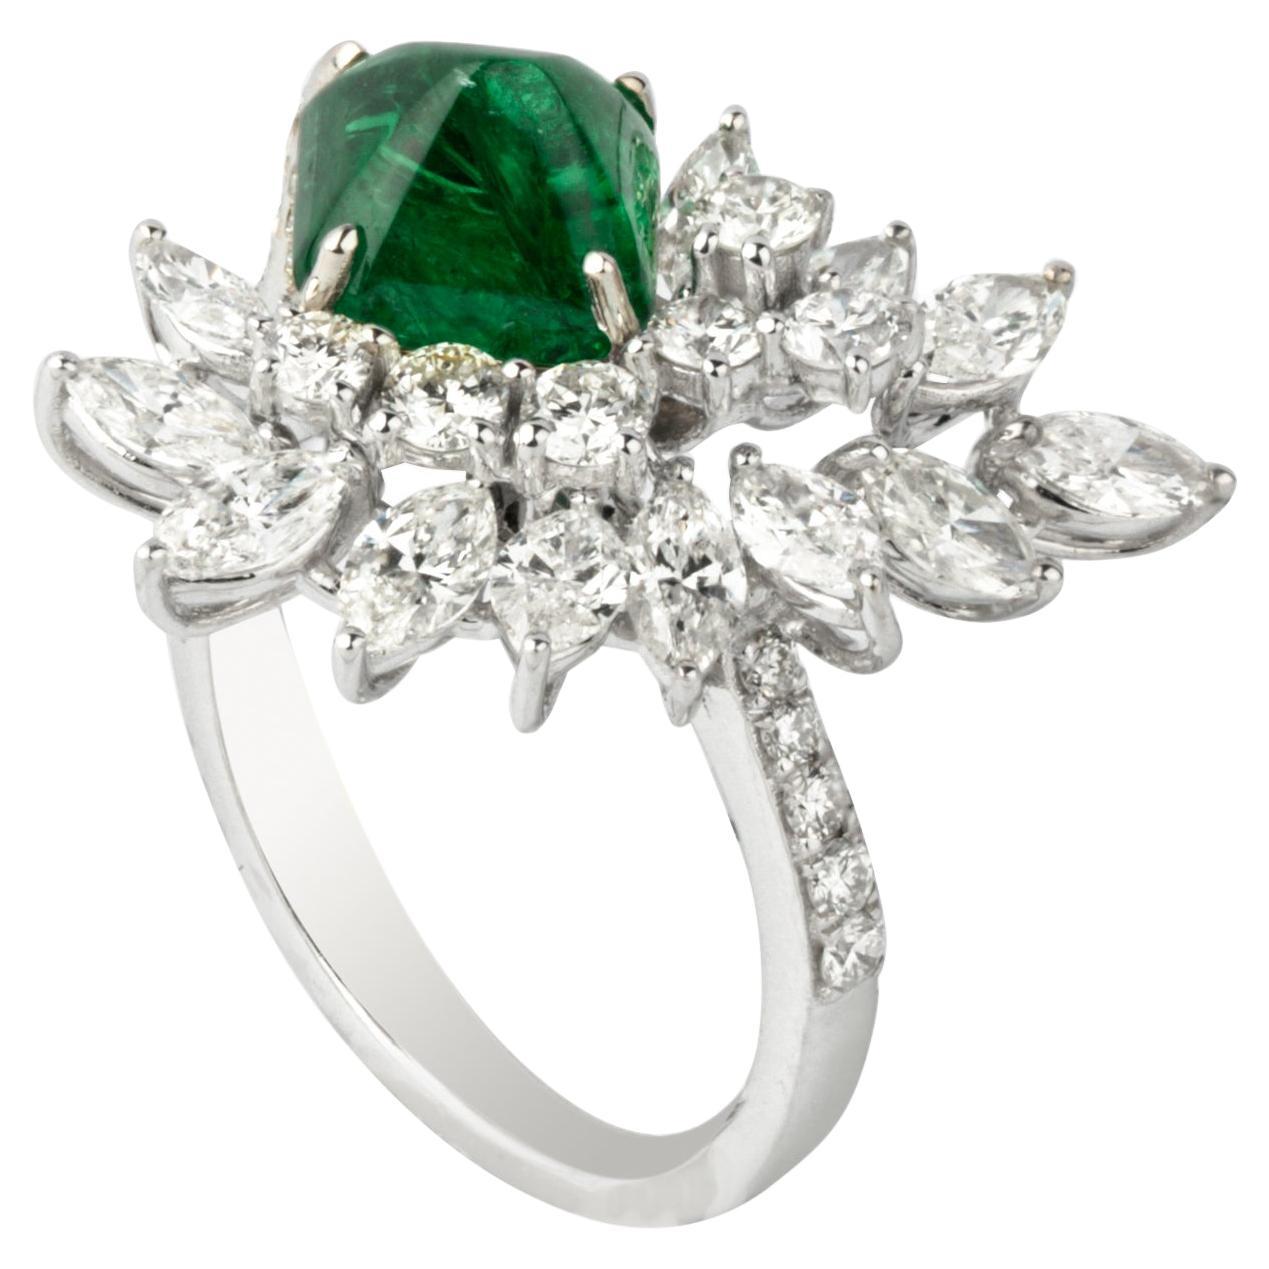 2.34 Ct Natural  Zambian Emerald & 2.15 Ct Natural Diamond Ring in 18KW Gold